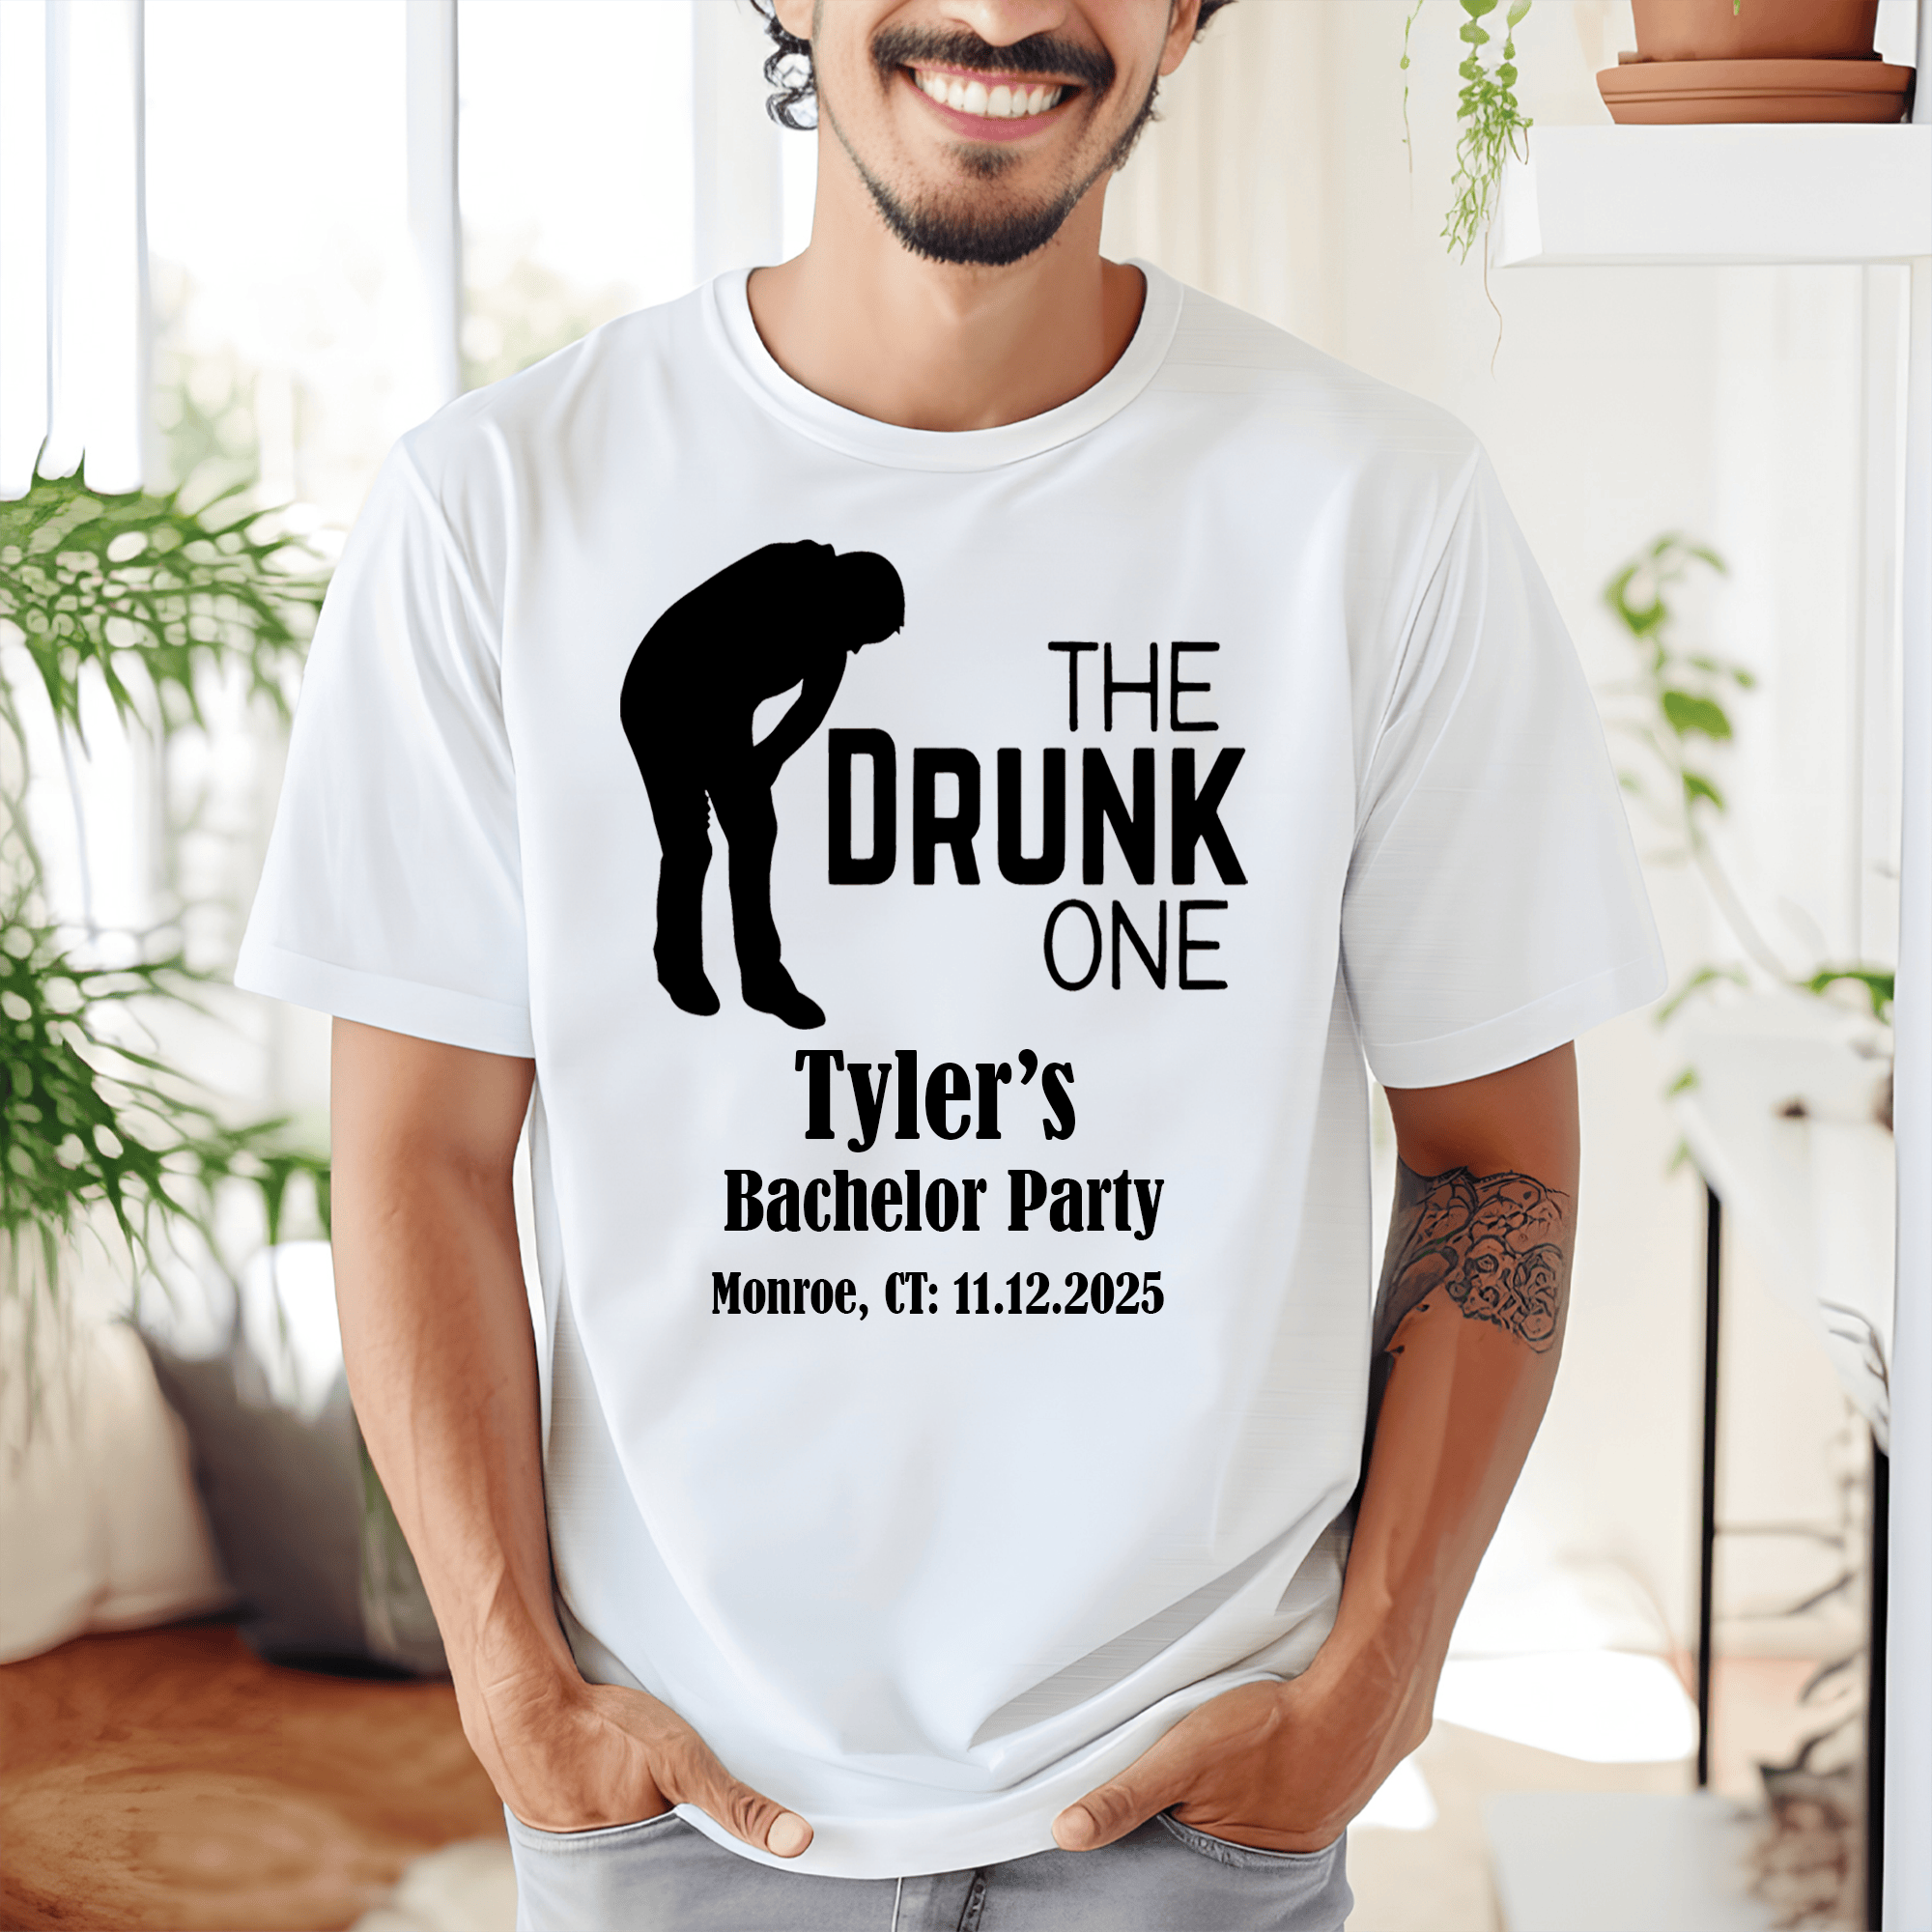 Grey Mens T-Shirt With The Drunk One Design